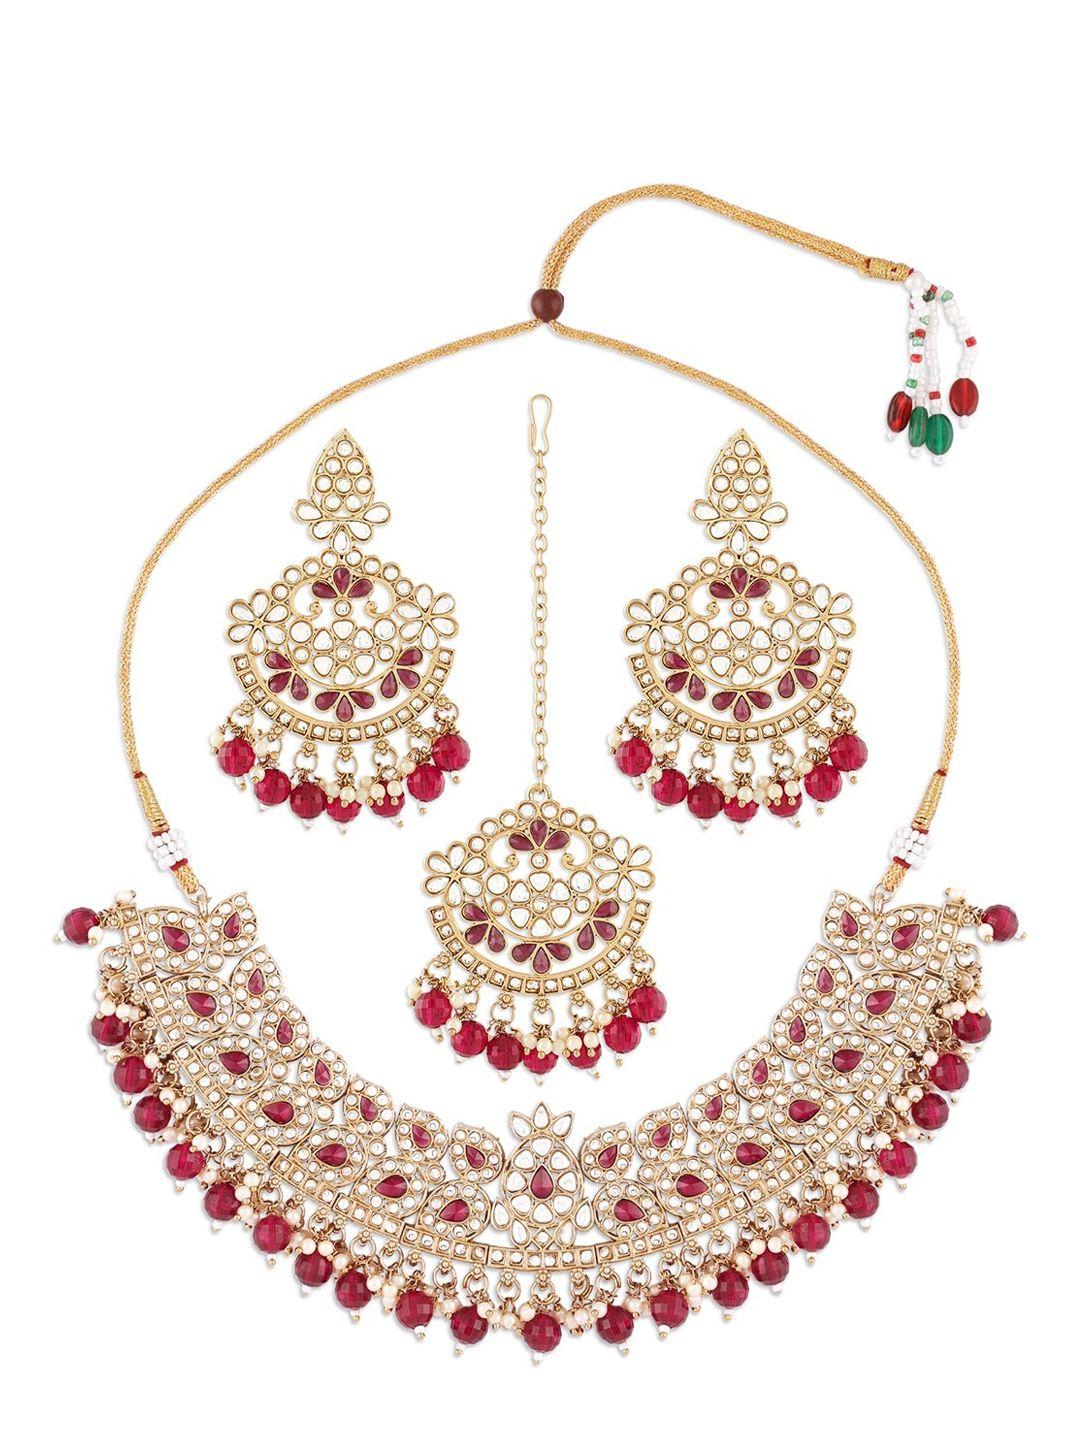 zaveri-pearls-gold-plated-kundan-studded-&-beaded-necklace-and-earrings-with-maang-tika